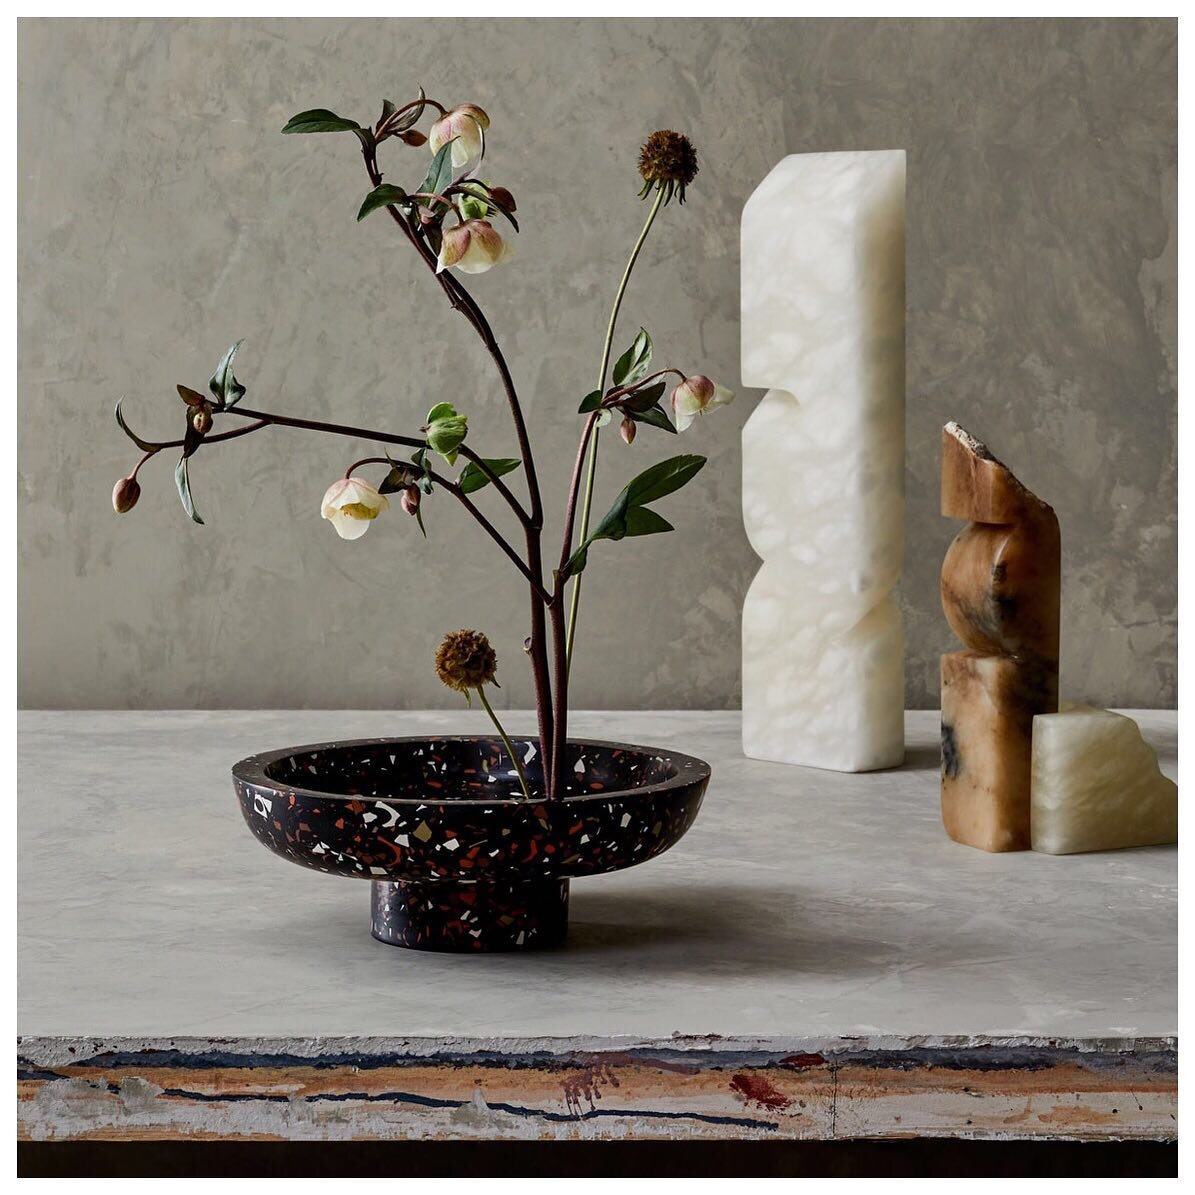 Another stunning shot from @artistsandobjects featuring my collaboration vessel with @olivia_aspinall &amp; these beautiful stone sculptures from @lotti_v_closs_studio ❤️
.
Styling @hannah_bort 
Photography @veerleevens.photography
.
.

#ornamentalgr